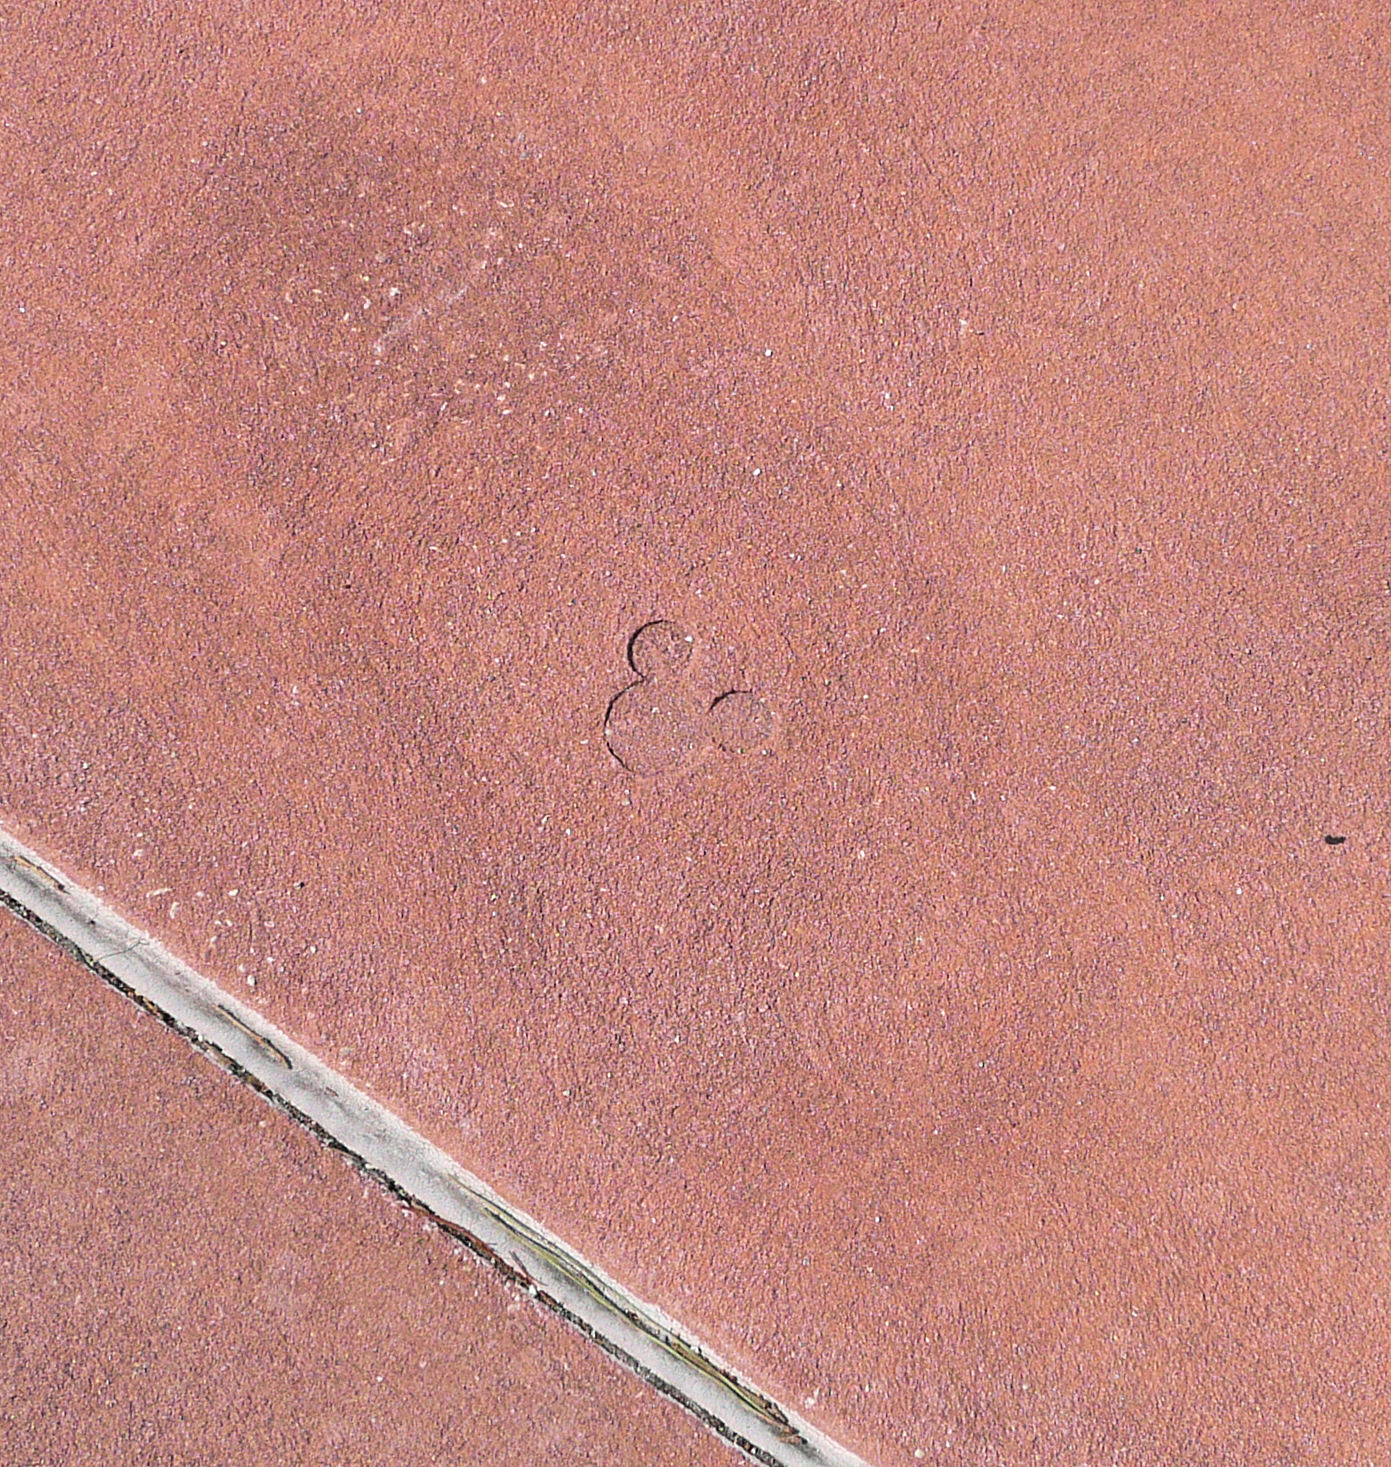 A Hidden Mickey in the transportation area outside Disney's Hollywood Studios.